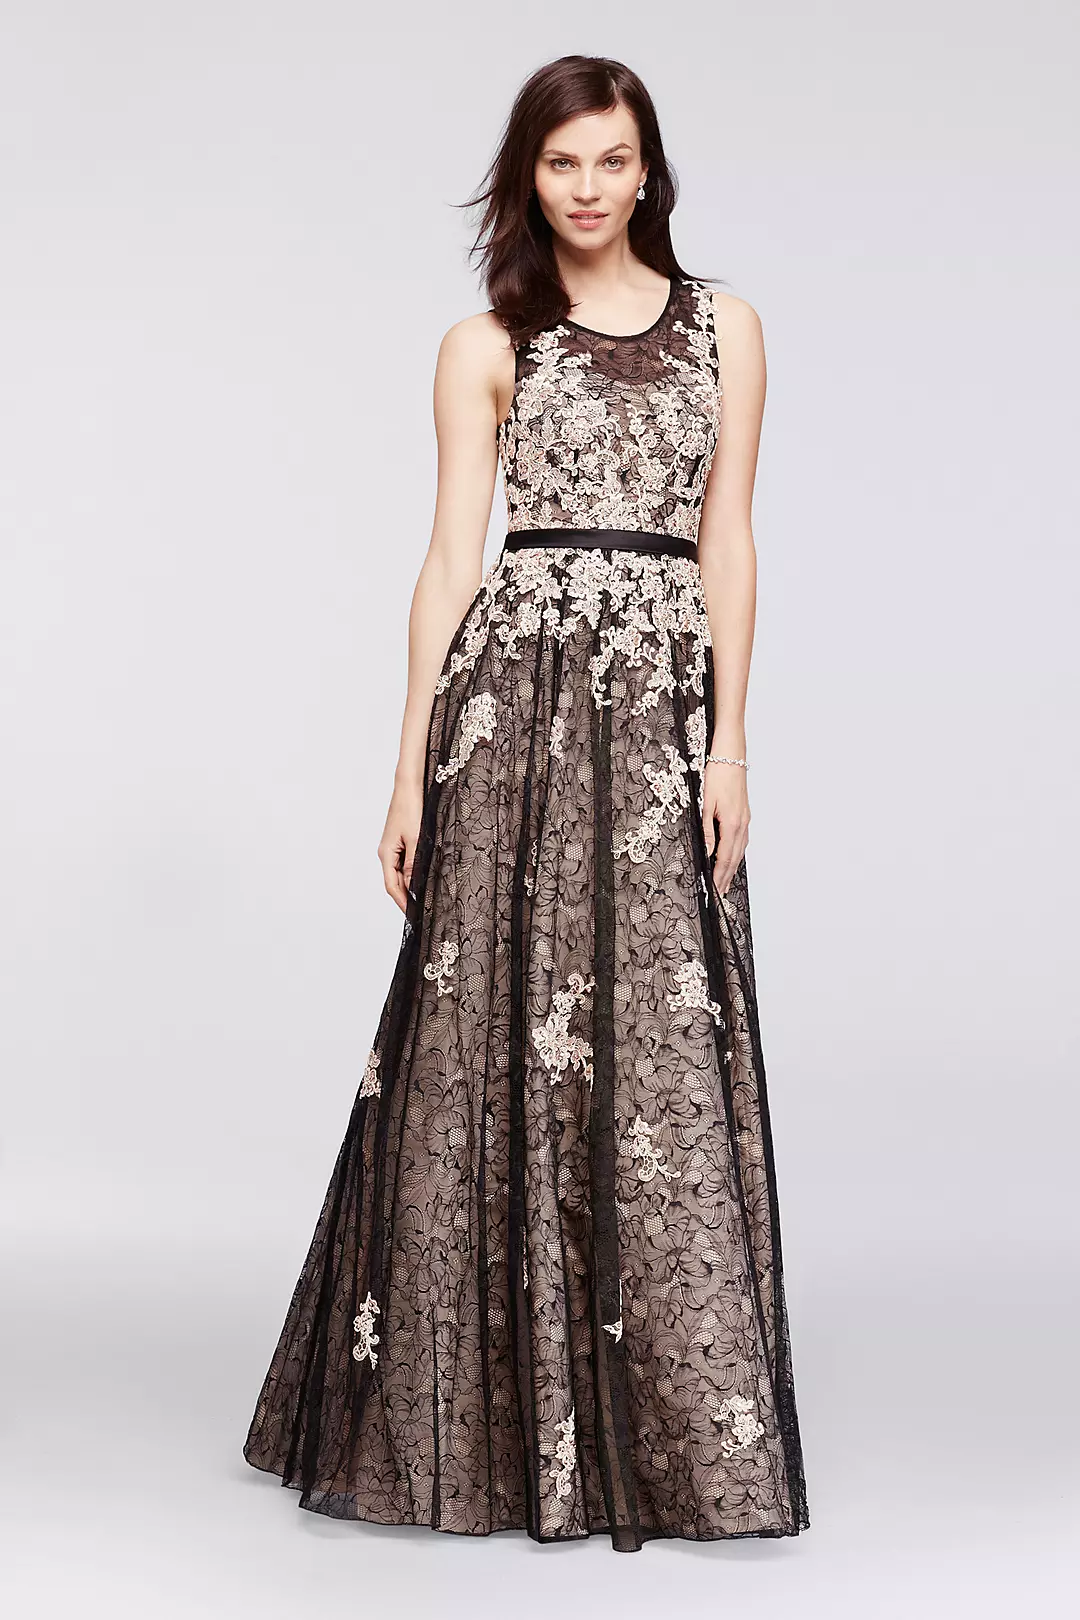 Sleeveless Lace Ball Gown with Illusion Neckline Image